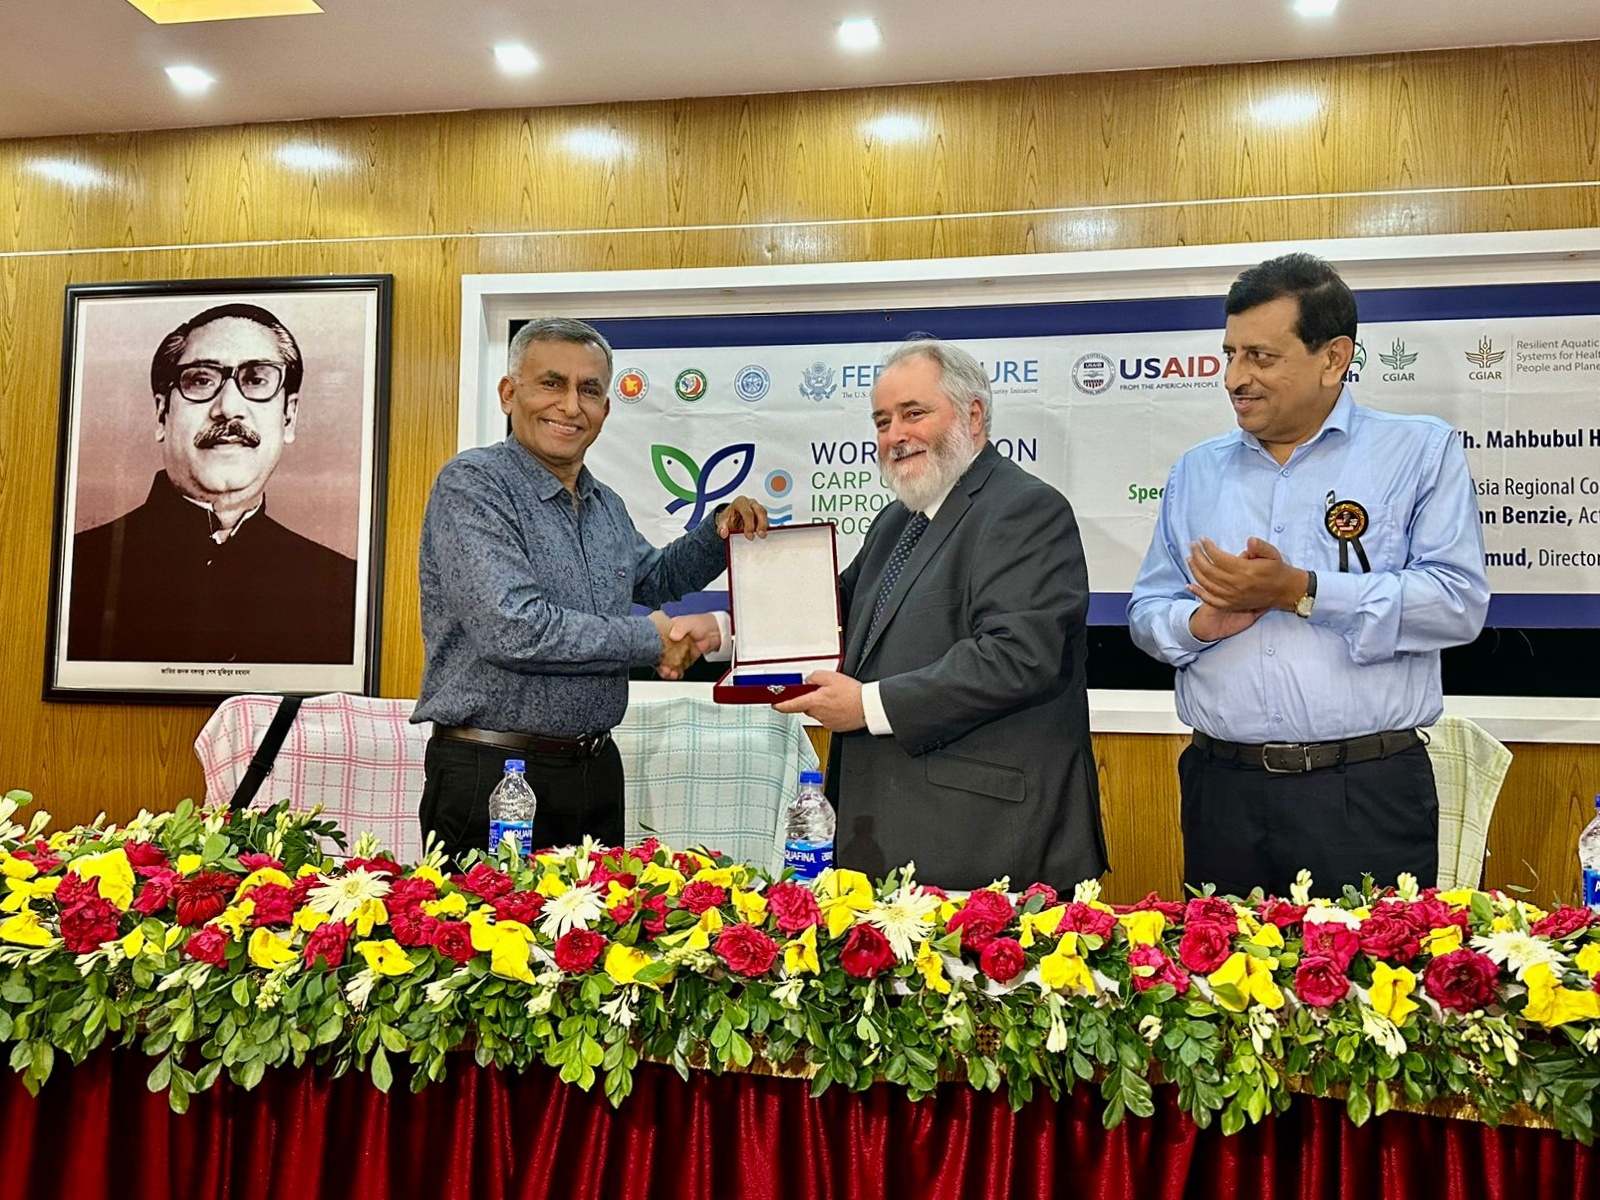 M. Gulam Hussain received an appreciation crest on behalf of the Fish Innovation Lab from John Benzie, acting director of Aquatic Food Biosciences for WorldFish.